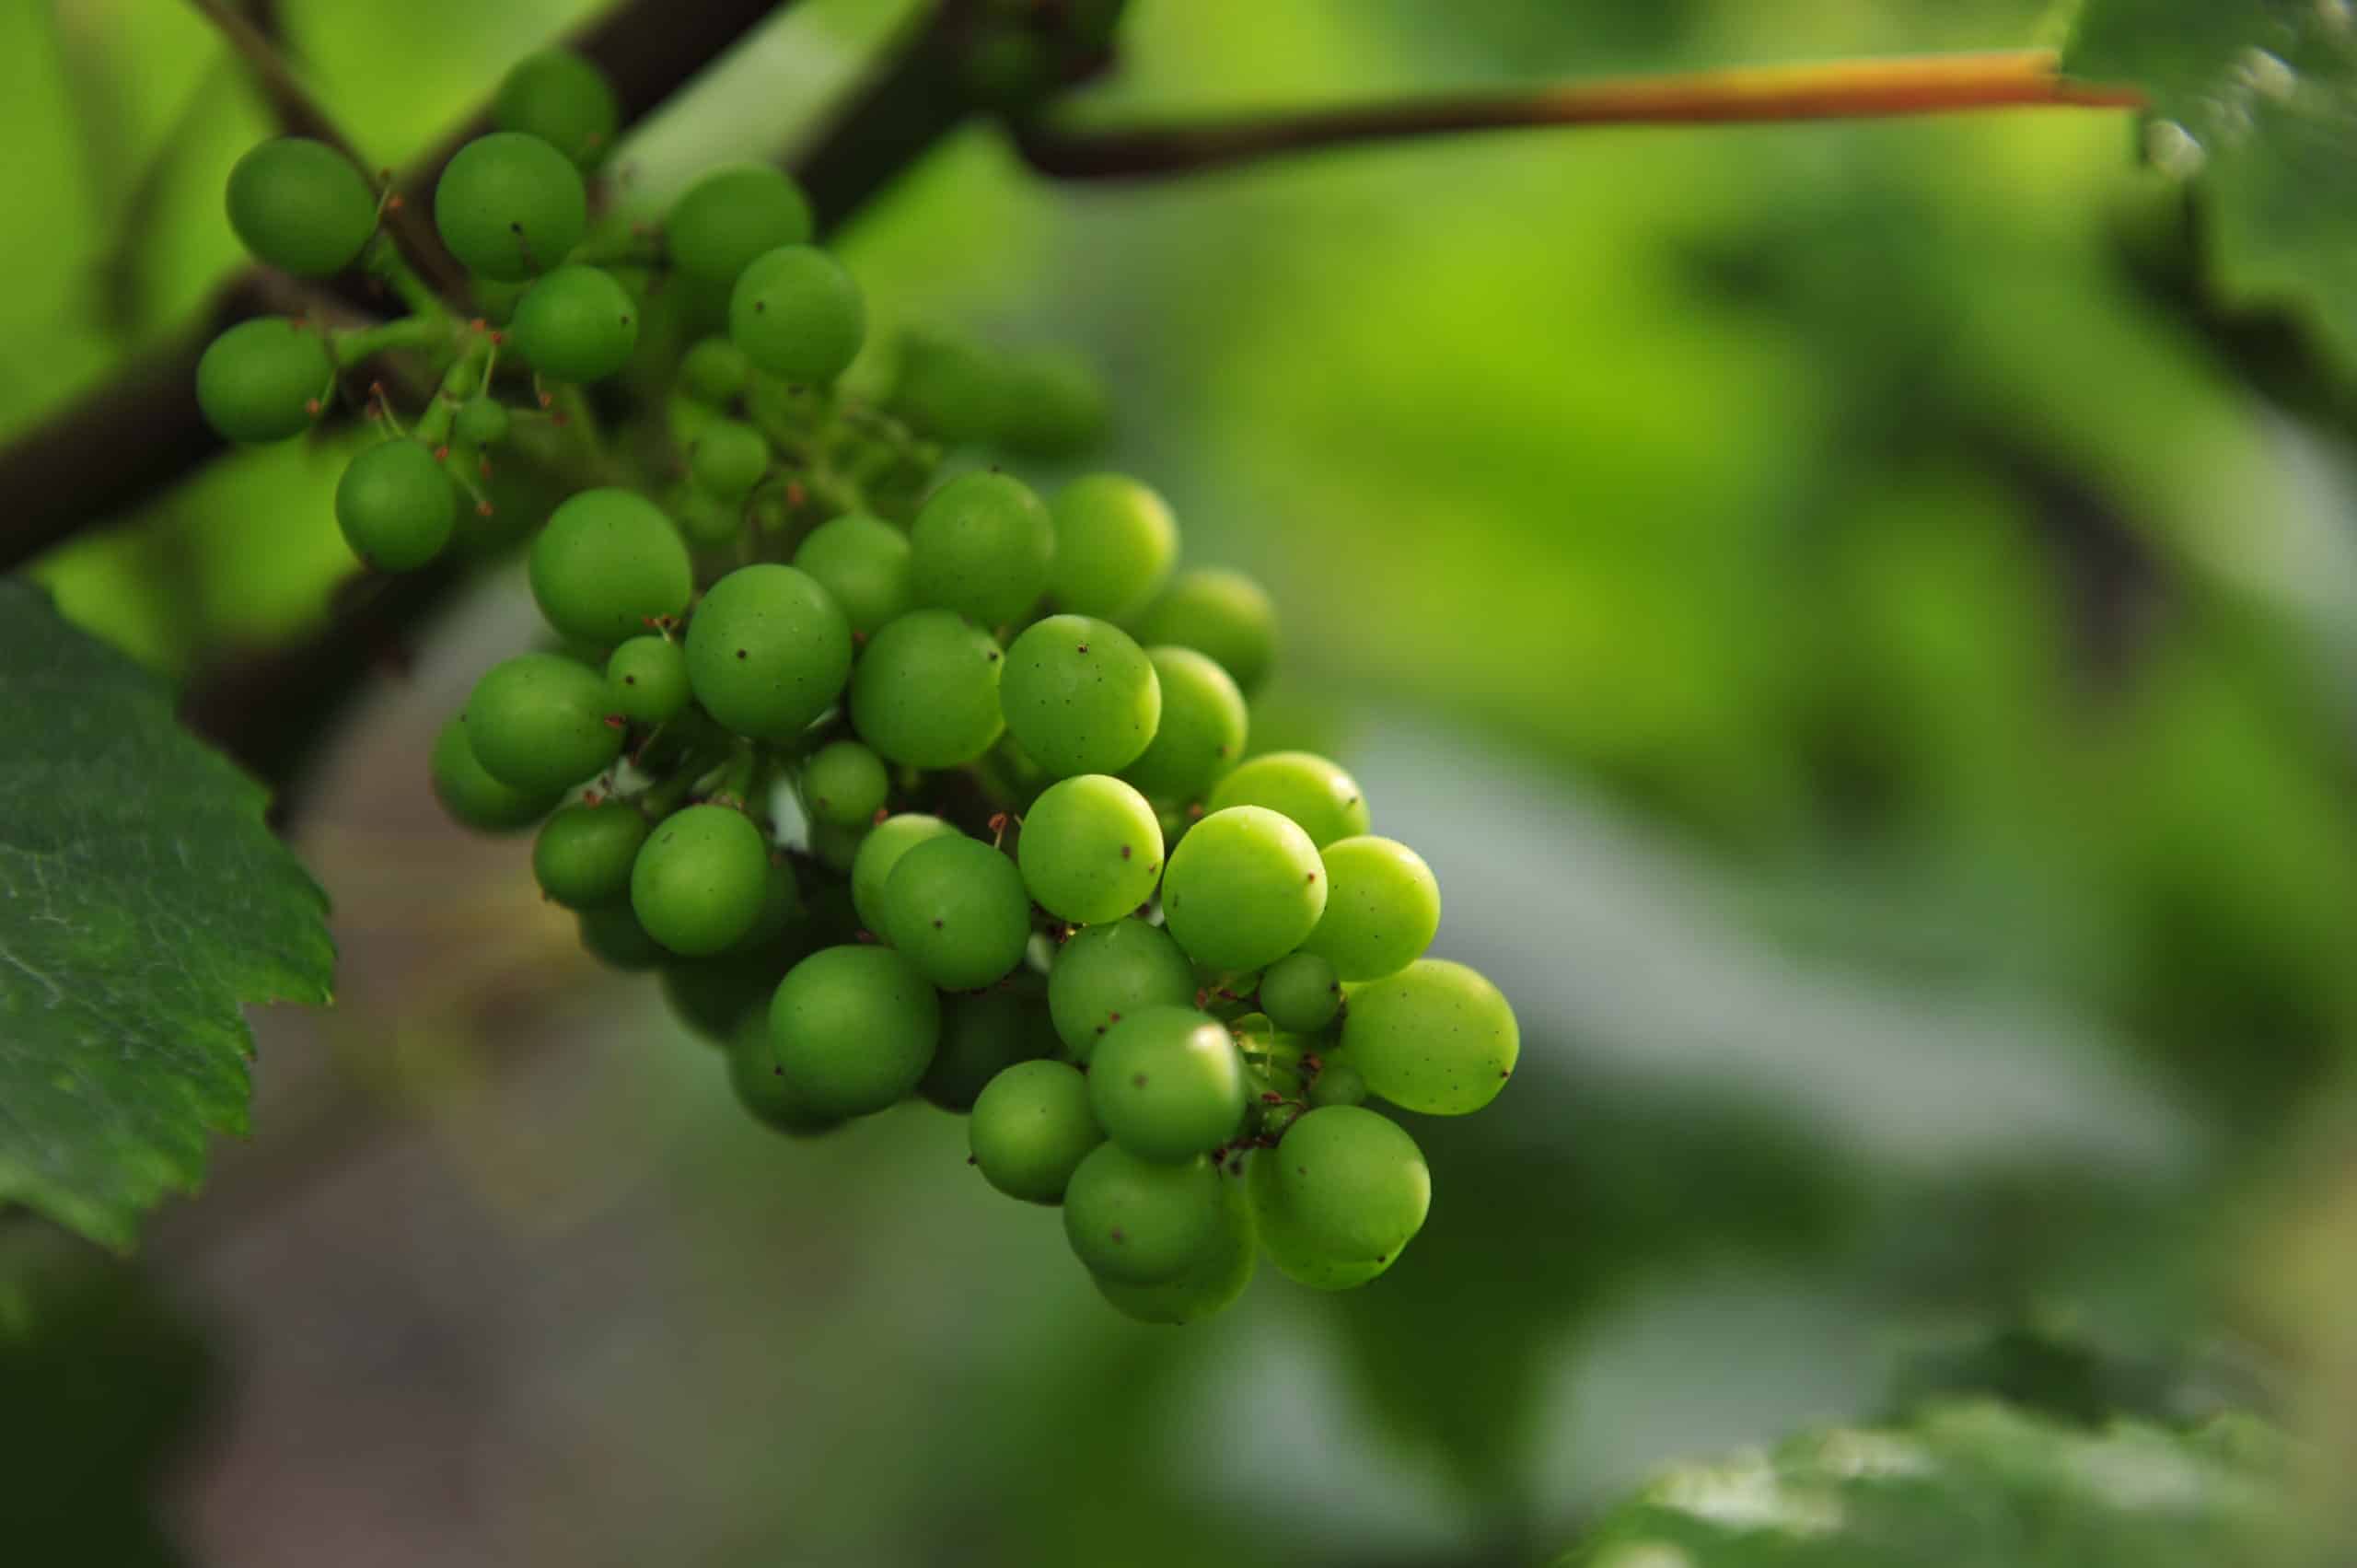 The Vegetative Cycle of the Vine